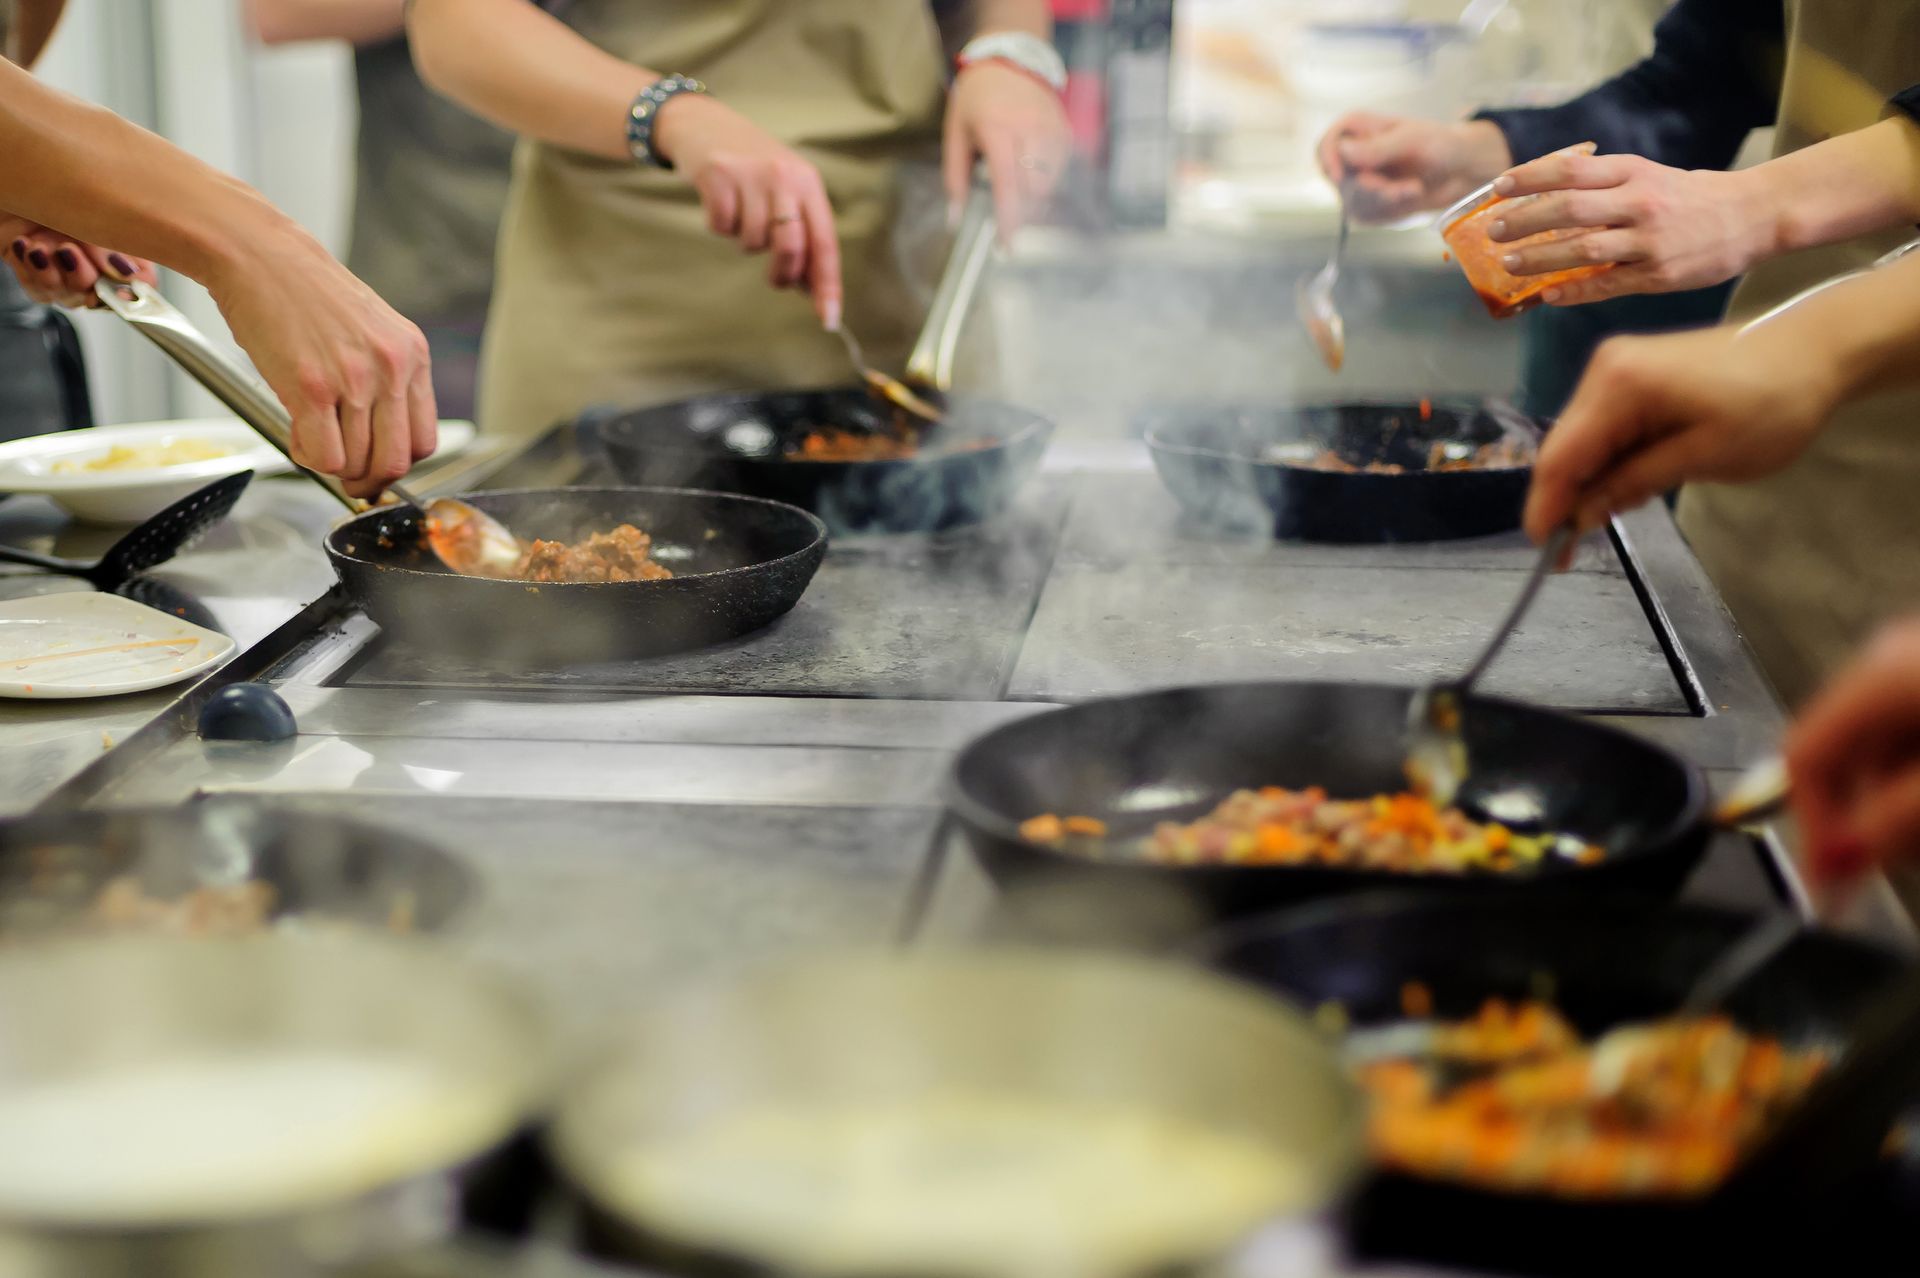 a group of people are cooking food in pans in a kitchen